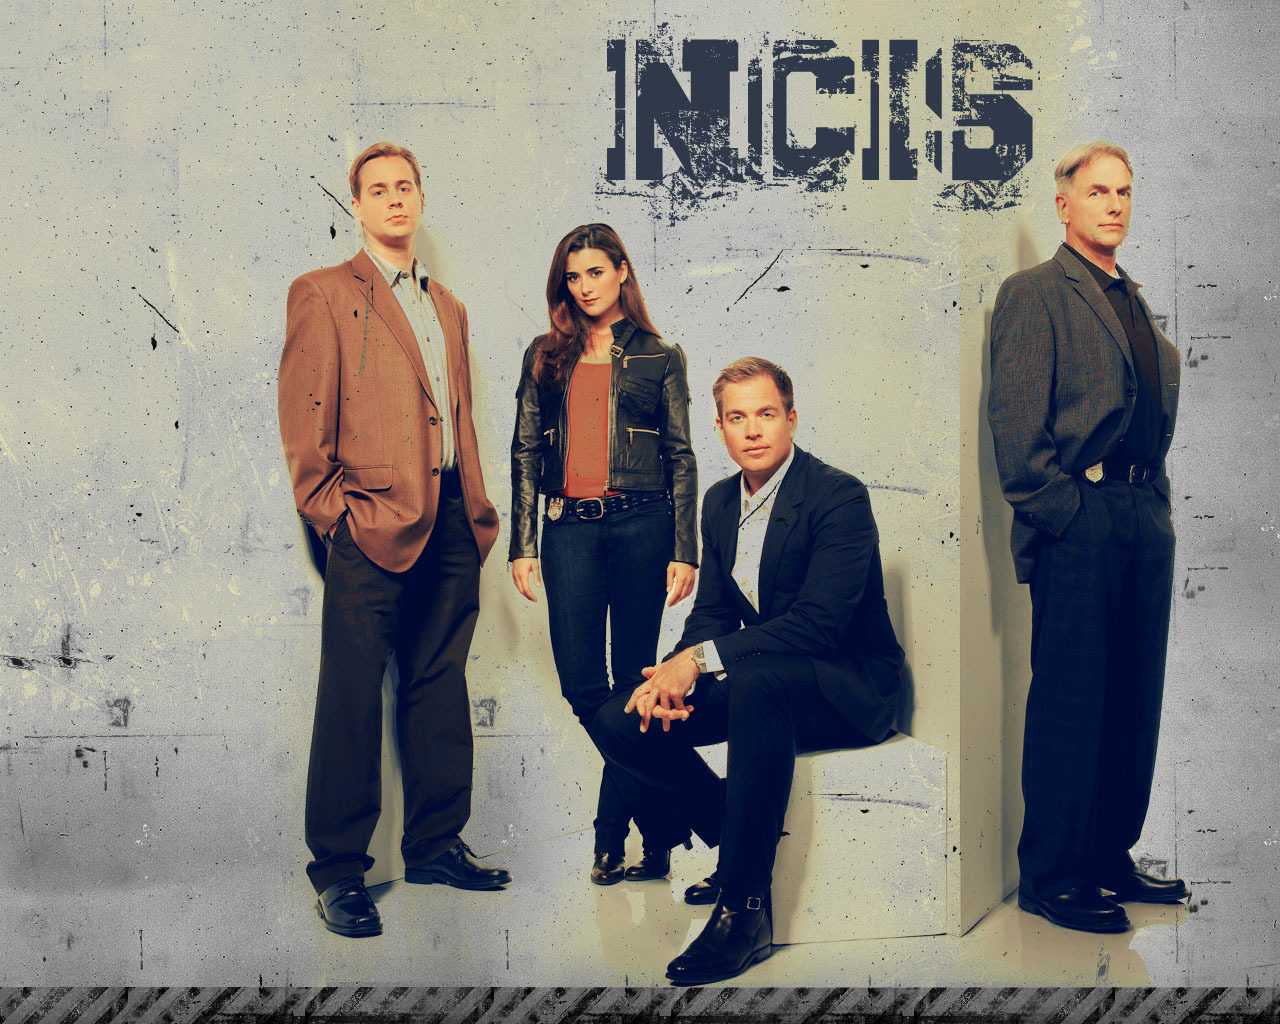 Free Download Ncis Images Ncis Wallpaper Hd Wallpaper And Images, Photos, Reviews